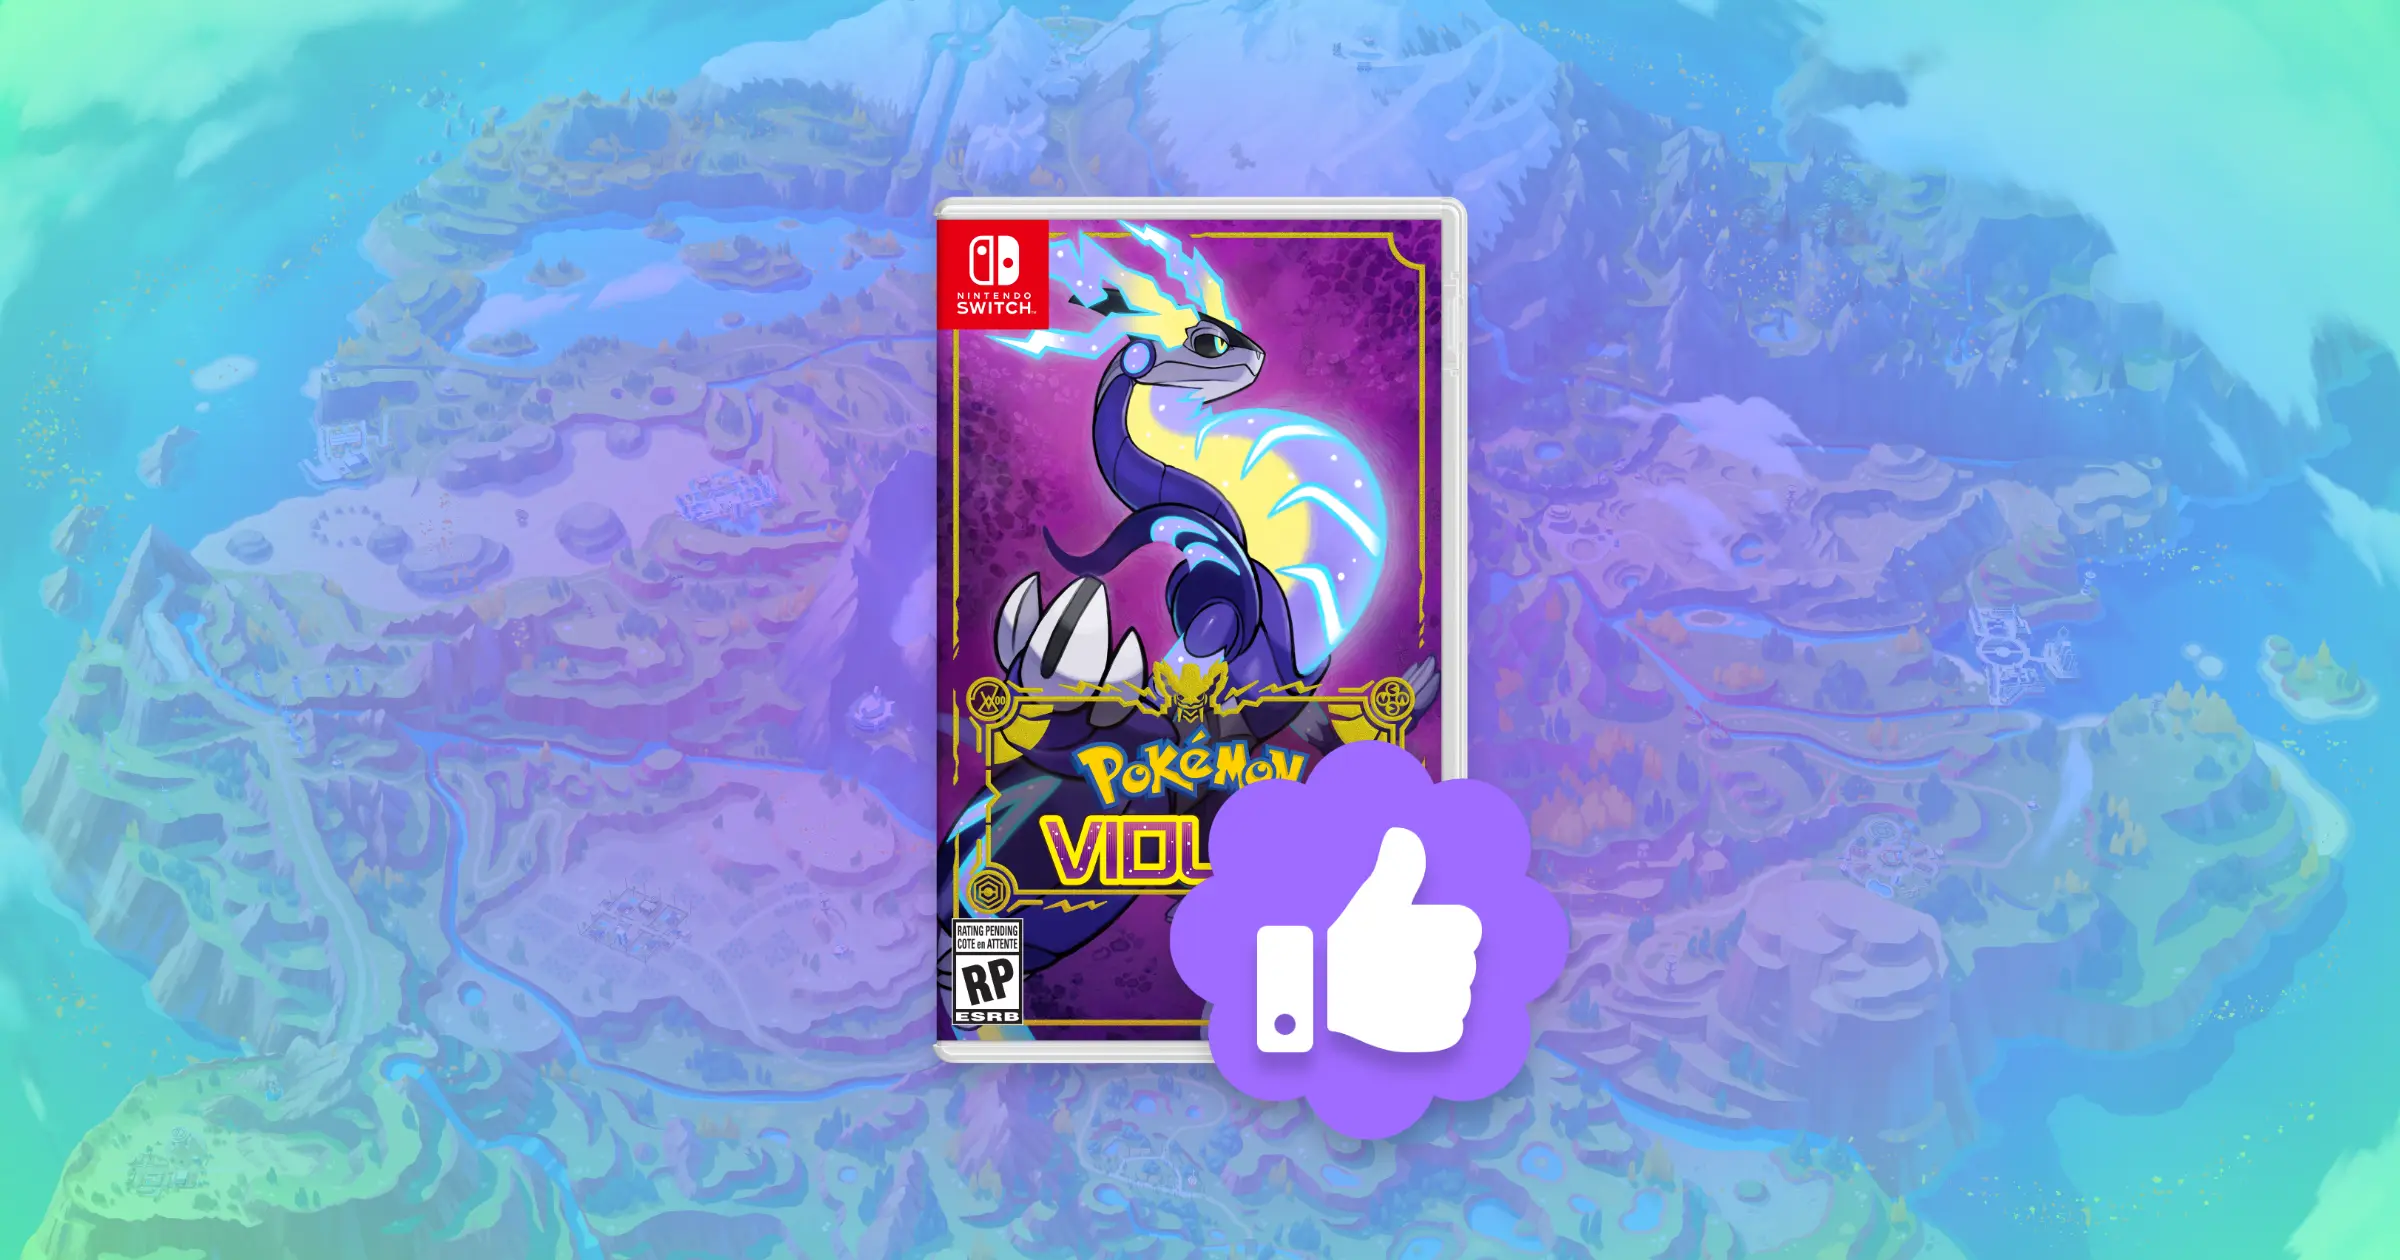 The Pokémon Violet game cover with a purple badge with a white thumbs up in the bottom right hand corner. The game box is on a background of the game map.